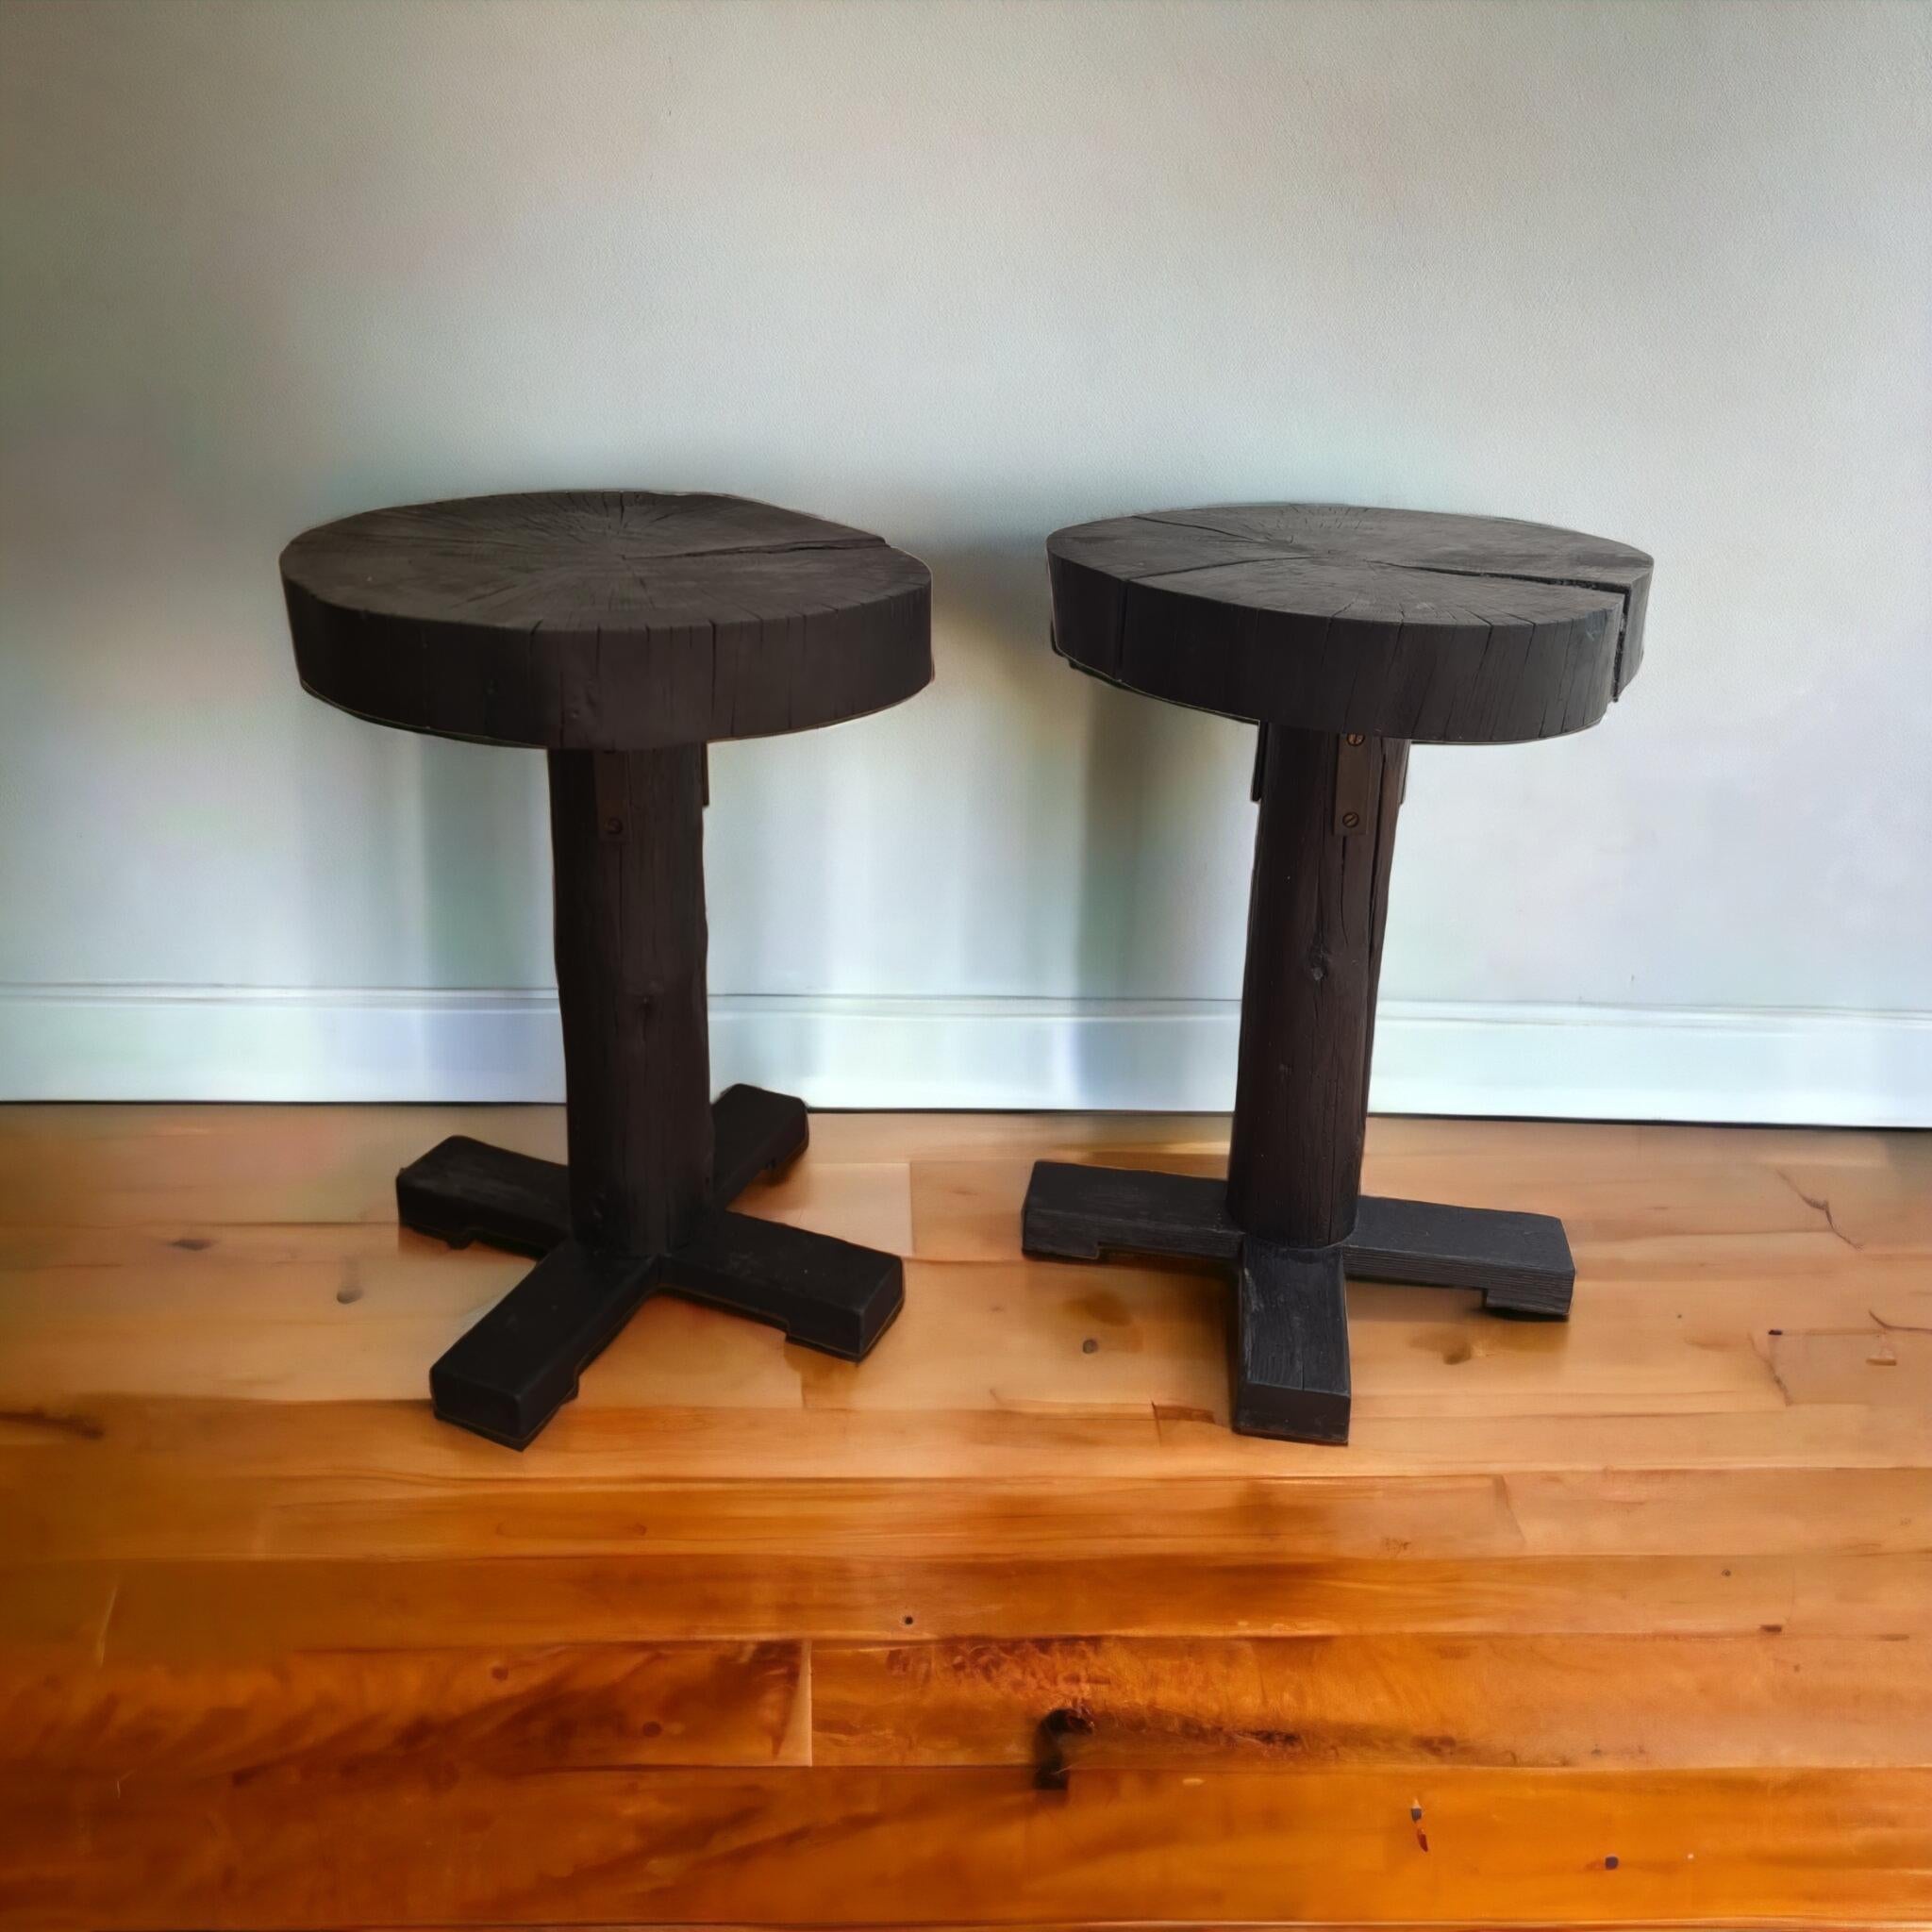 set of 2 pedestal 

The natural and black finish of the Shou Sugi Ban enhances the grain of the wood, giving this side table a look that is both rustic and contemporary. The clean lines and balanced proportions add a touch of modernity and